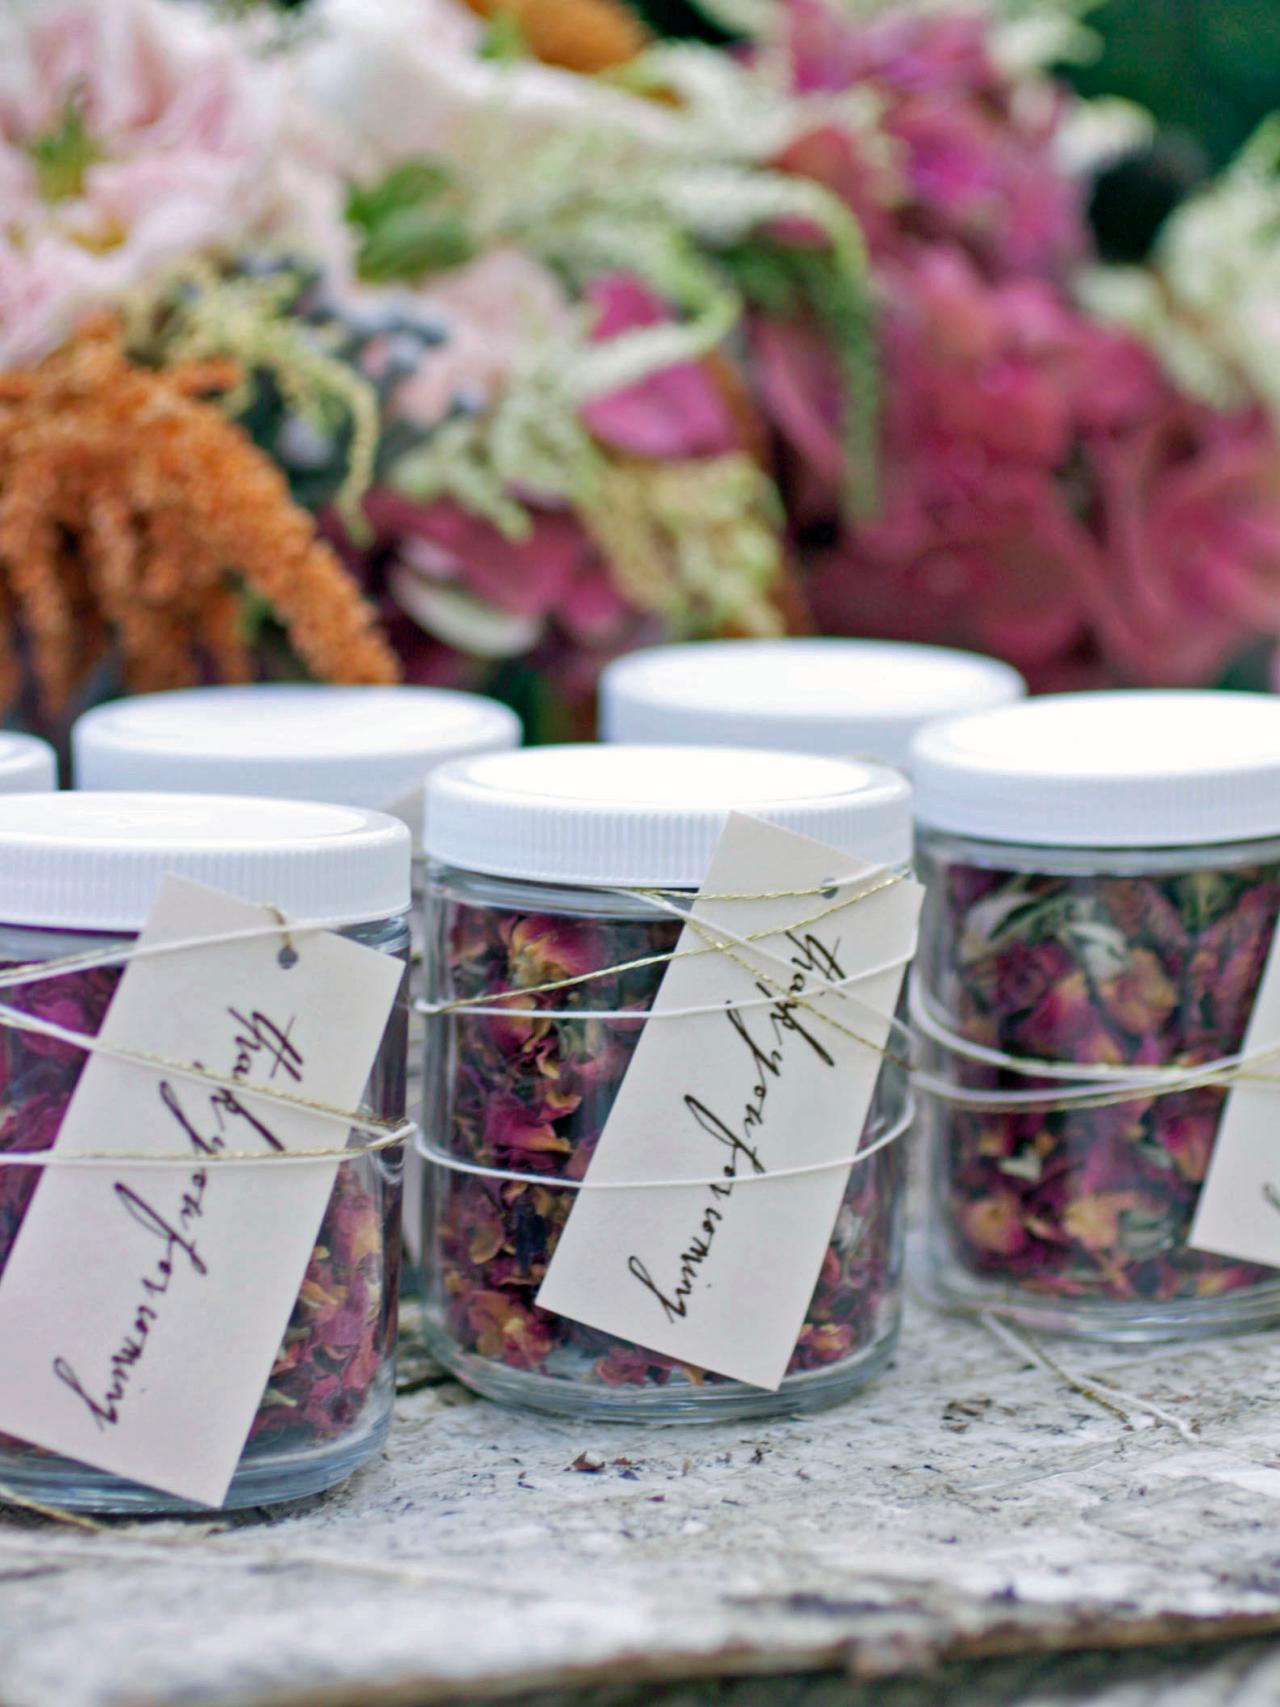 HGTV.com has ideas for easy-to-make gifts your wedding guests will actually want to take home.